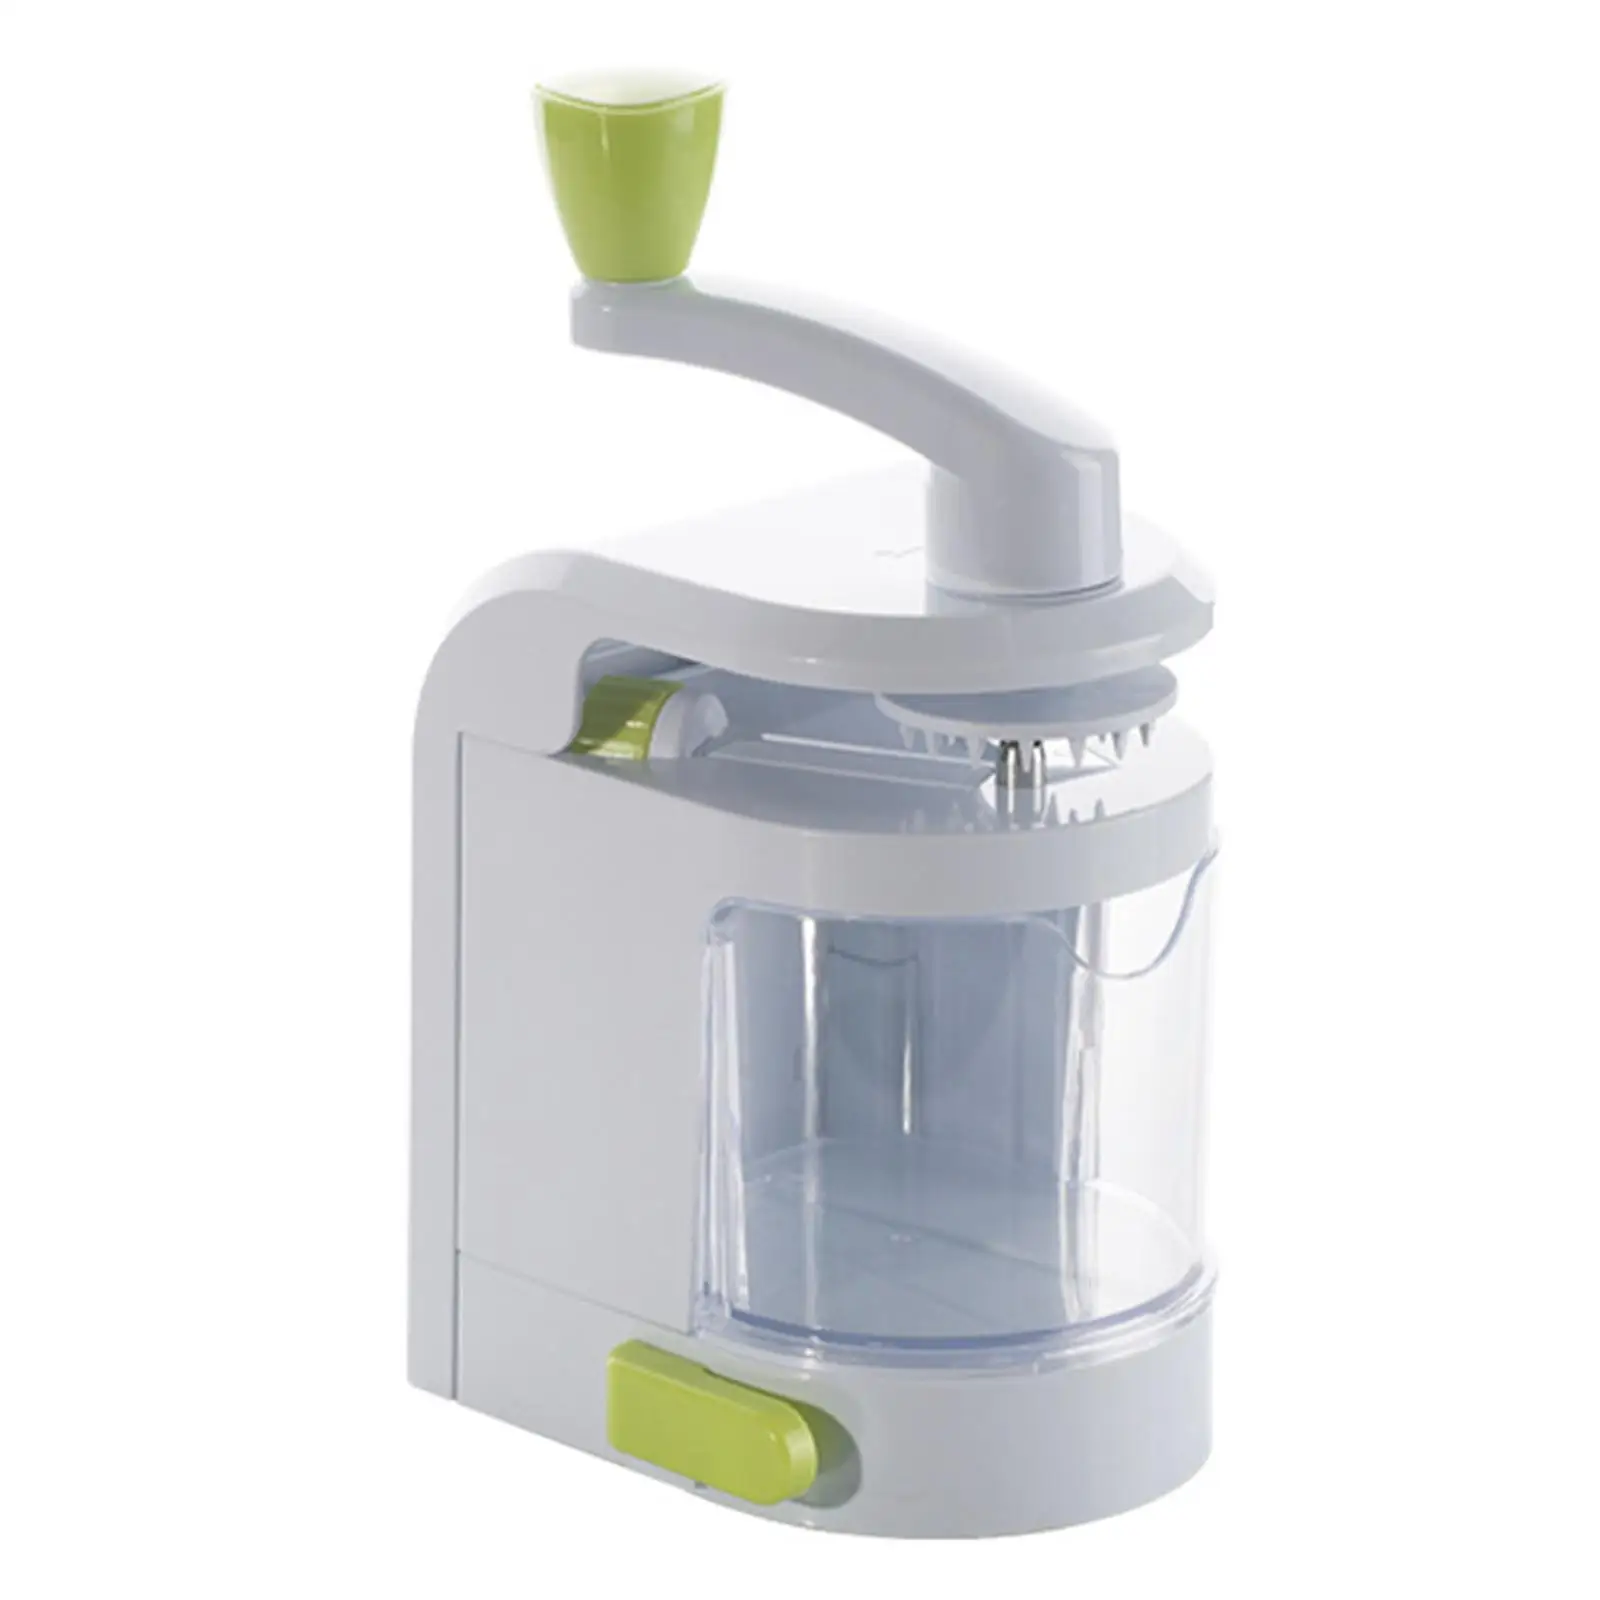 Rotary cheese Shredder, Vegetable Cutter, Fruits Shredder Kitchen Tools Easy to Clean Vegetable , for Onion Carrots Nuts